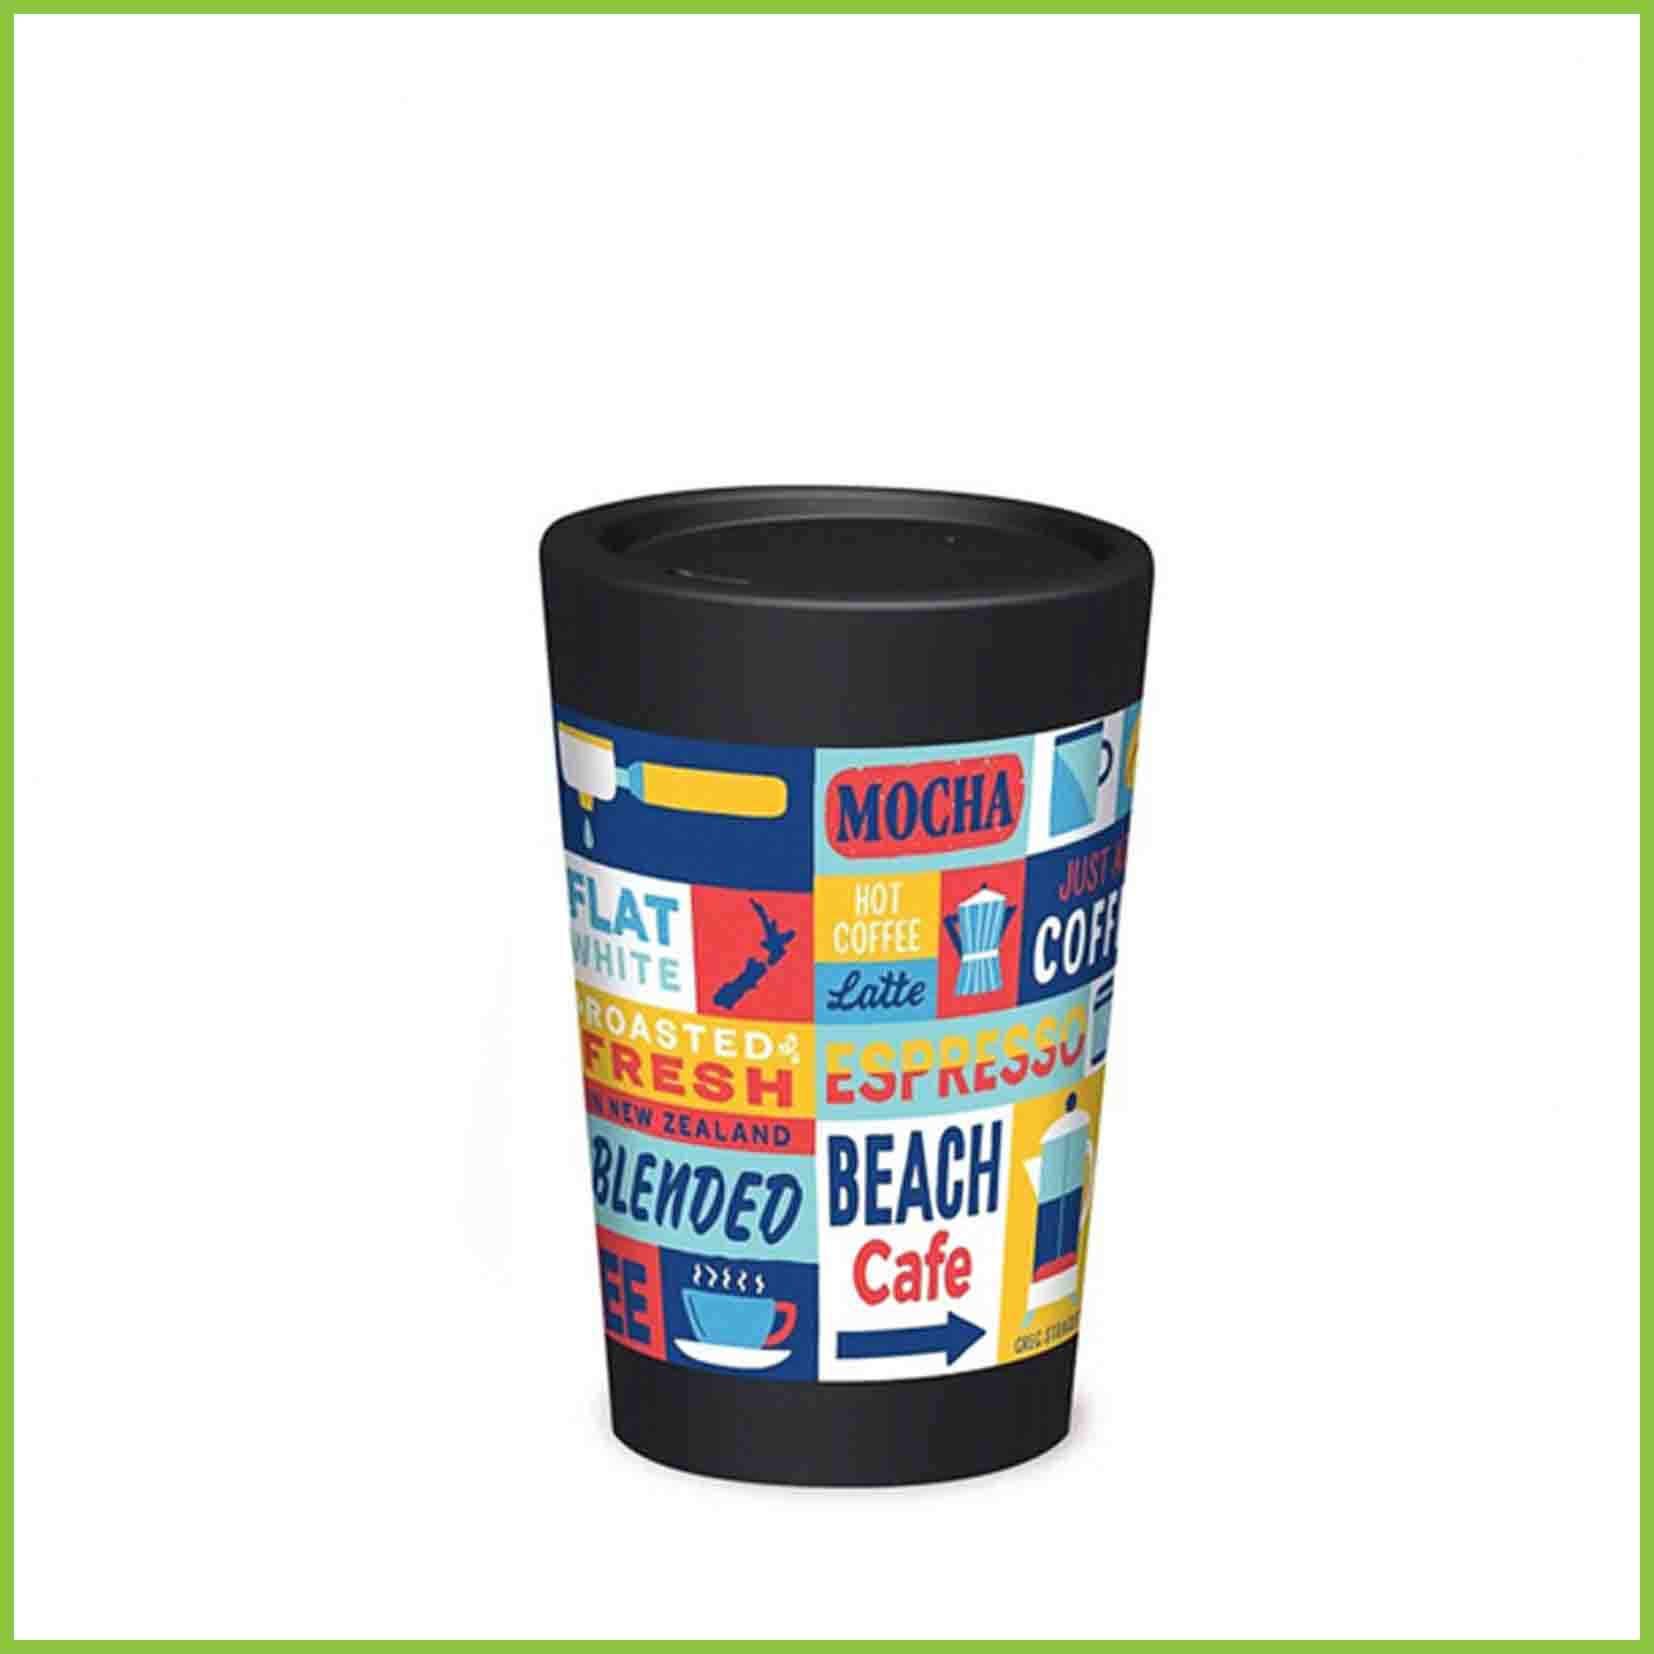 A lightweight reusable cup from CuppaCoffeeCup with a Straight Coffee design.